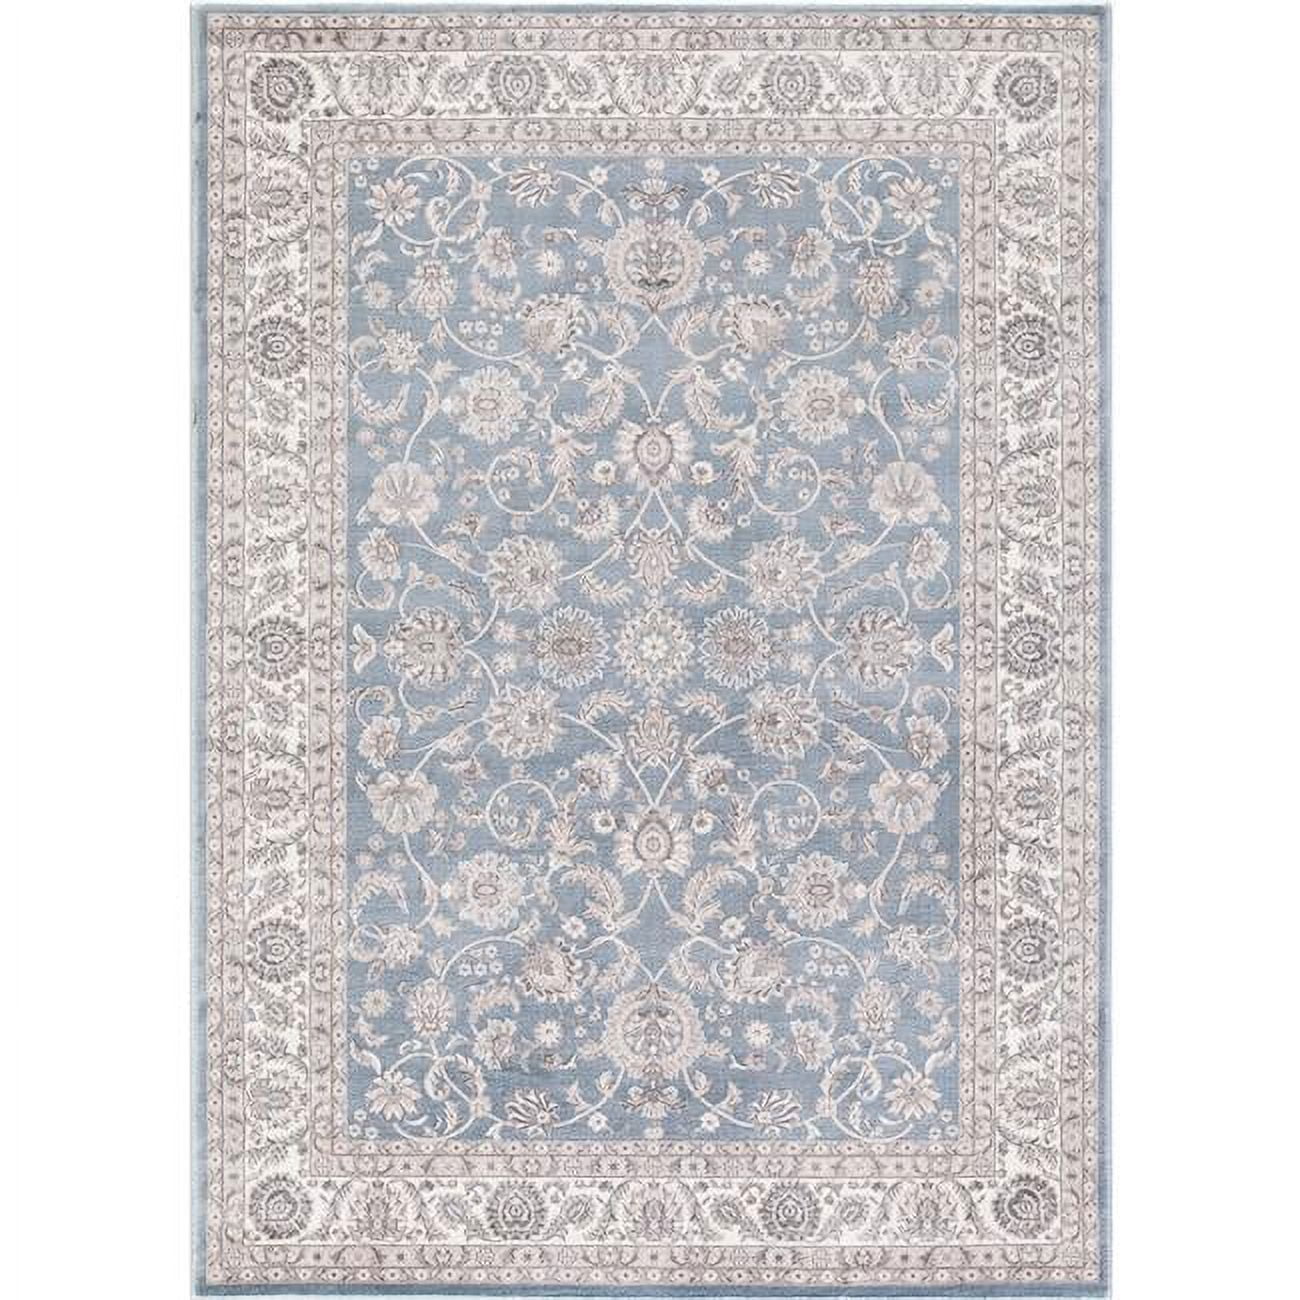 Picture of Concord Global 28145 5 ft. 3 in. x 7 ft. 3 in. Kashan Bergama - Blue